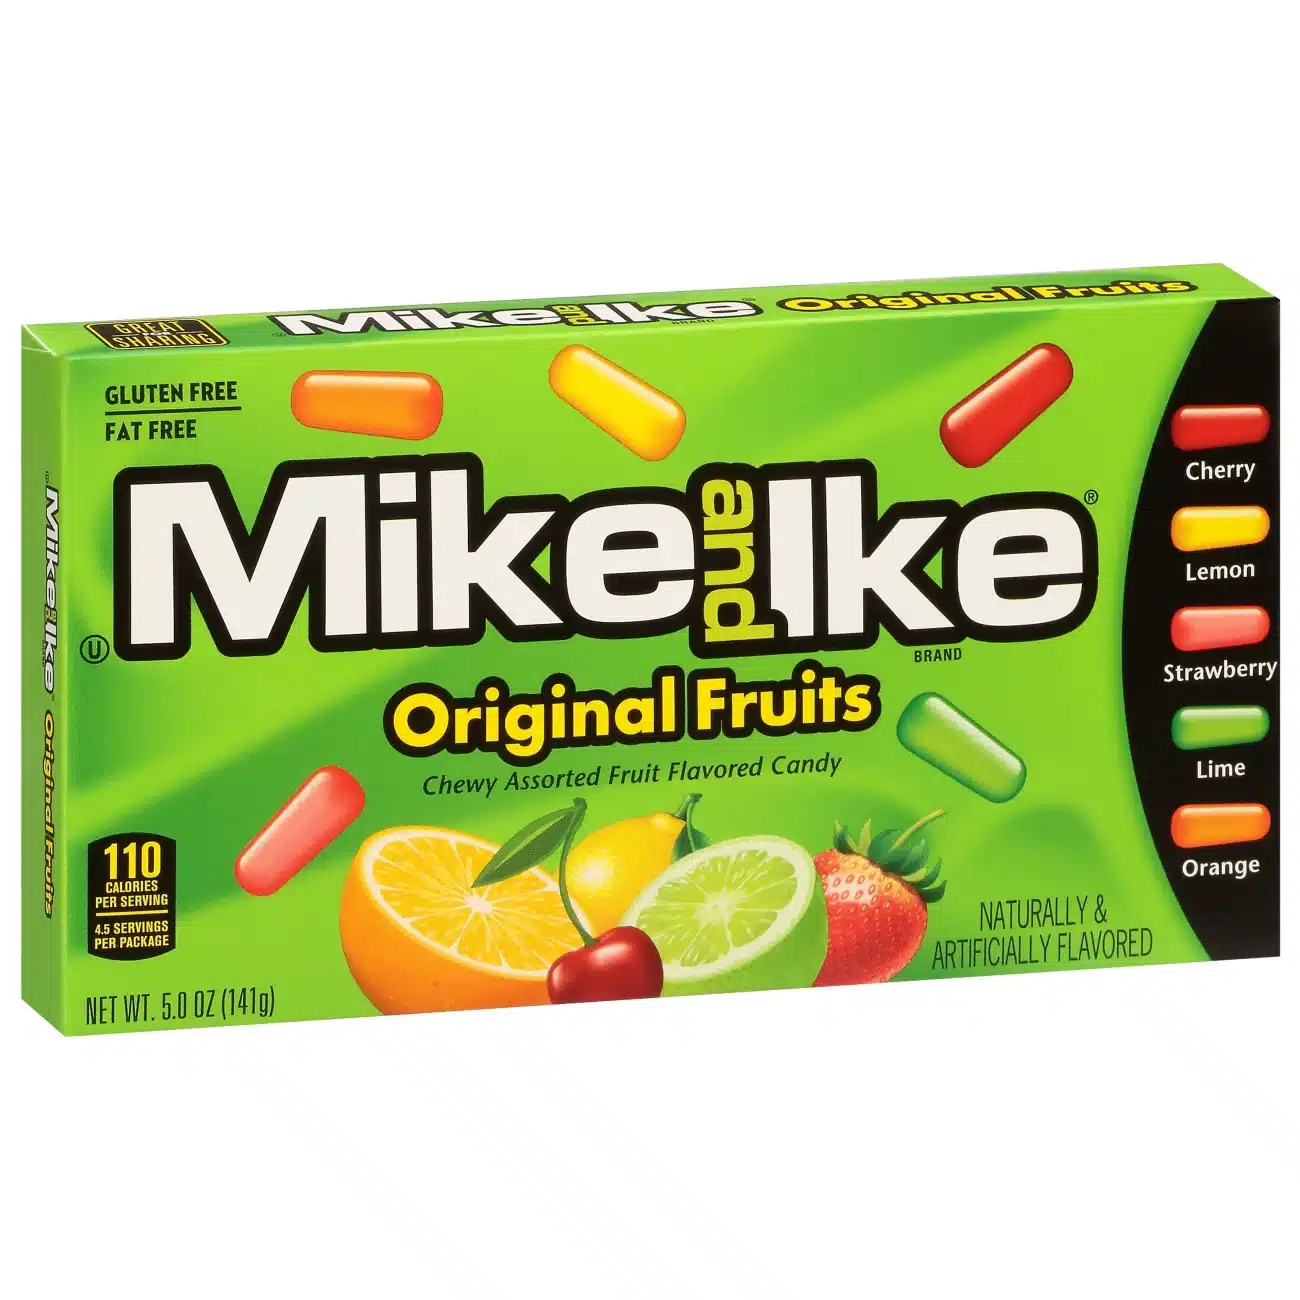 Are Mike and Ikes Gluten Free?